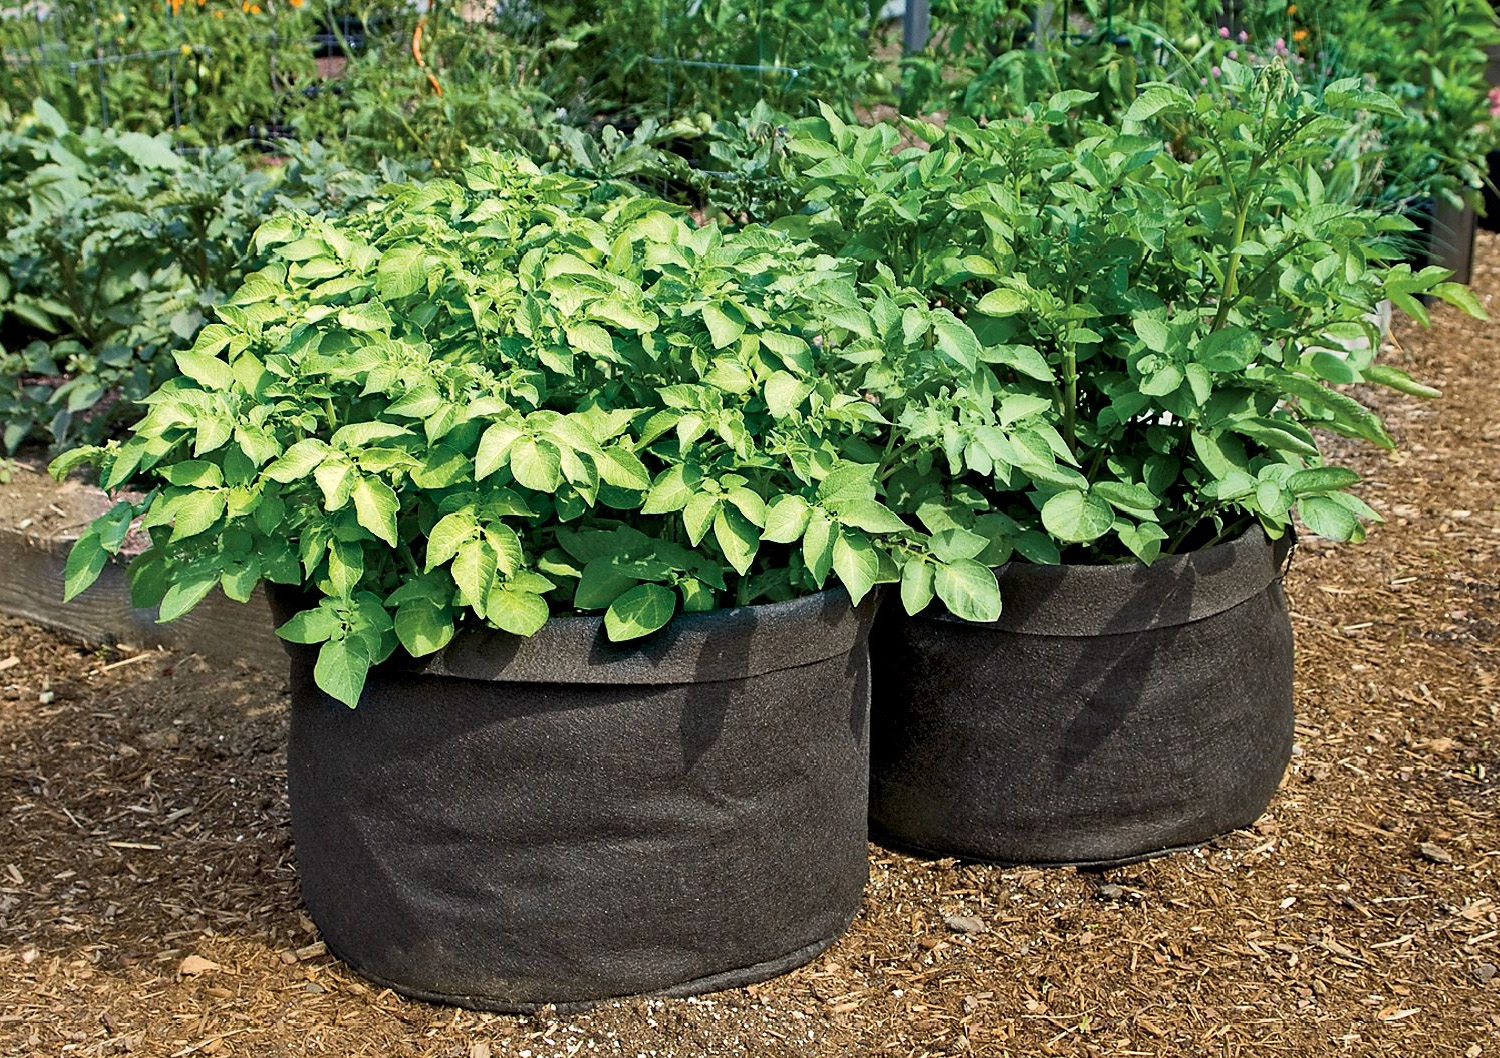 Best Selling Grow Bags & Fabric Plant Pots - Reviews...